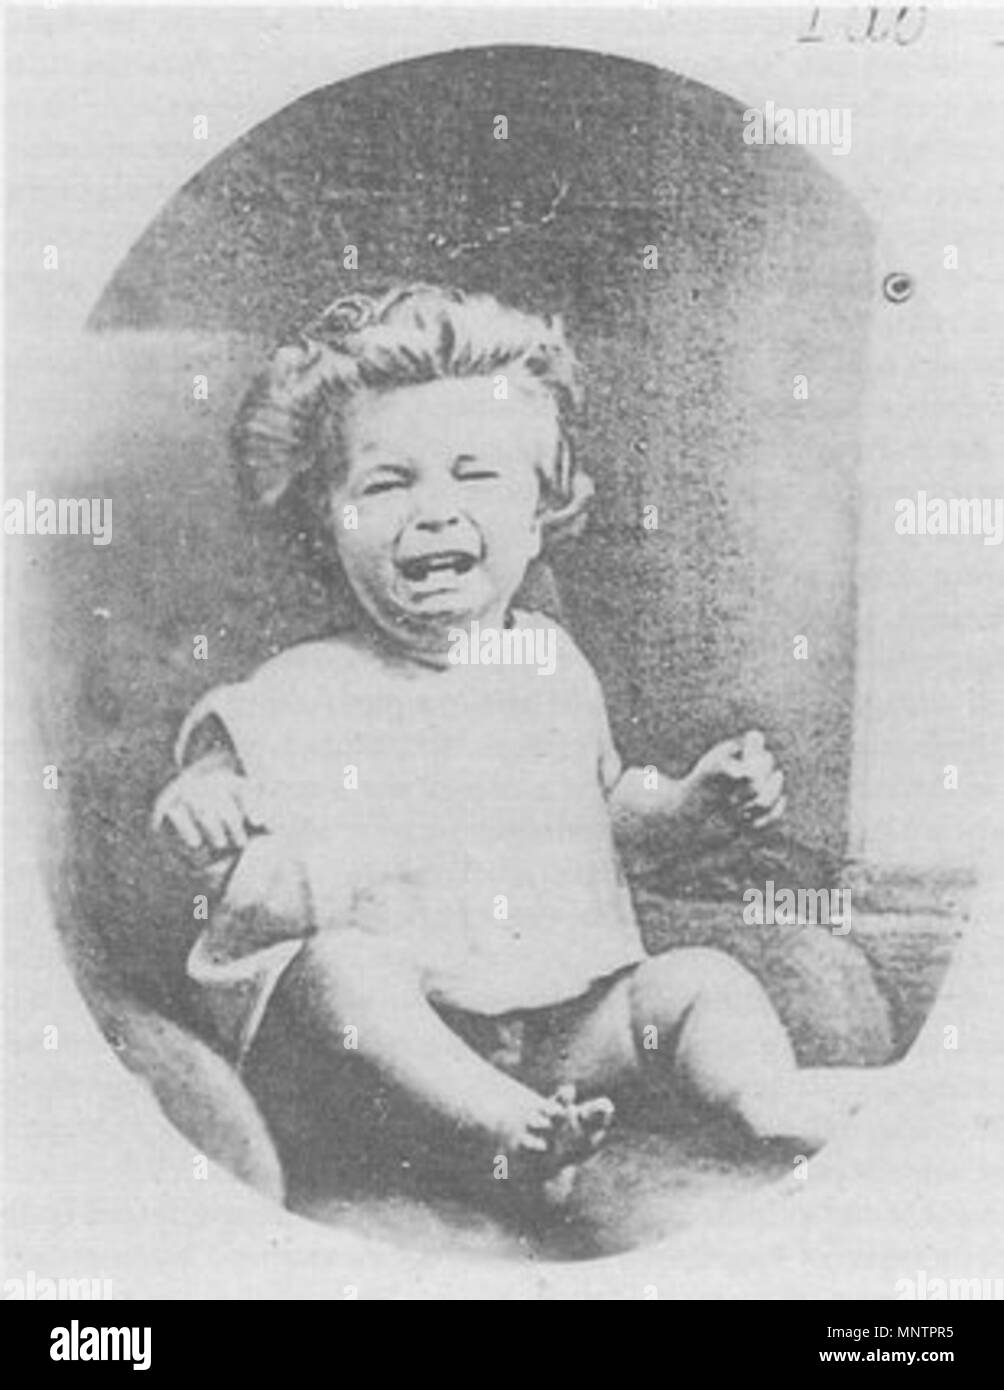 . English: The Ginx's Baby by O. G. Rejlander (1813-1875) - a typical commercial print, already heavily retouched (added chair etc.). 1871.   Oscar Gustave Rejlander  (1813–1875)     Alternative names O. G. Rejlander; Oscar Gustav Rejlander; Oscar Gustave Reijlander  Description British-Swedish photographer and painter  Date of birth/death 1813 18 January 1875  Location of birth/death Sweden Clapham  Work location London  Authority control  : Q725390 VIAF: 40230459 ISNI: 0000 0000 8375 2662 ULAN: 500030901 LCCN: n79023303 GND: 121262340 WorldCat 1048 Rejlander, 1871, Ginxs Baby retouched Stock Photo